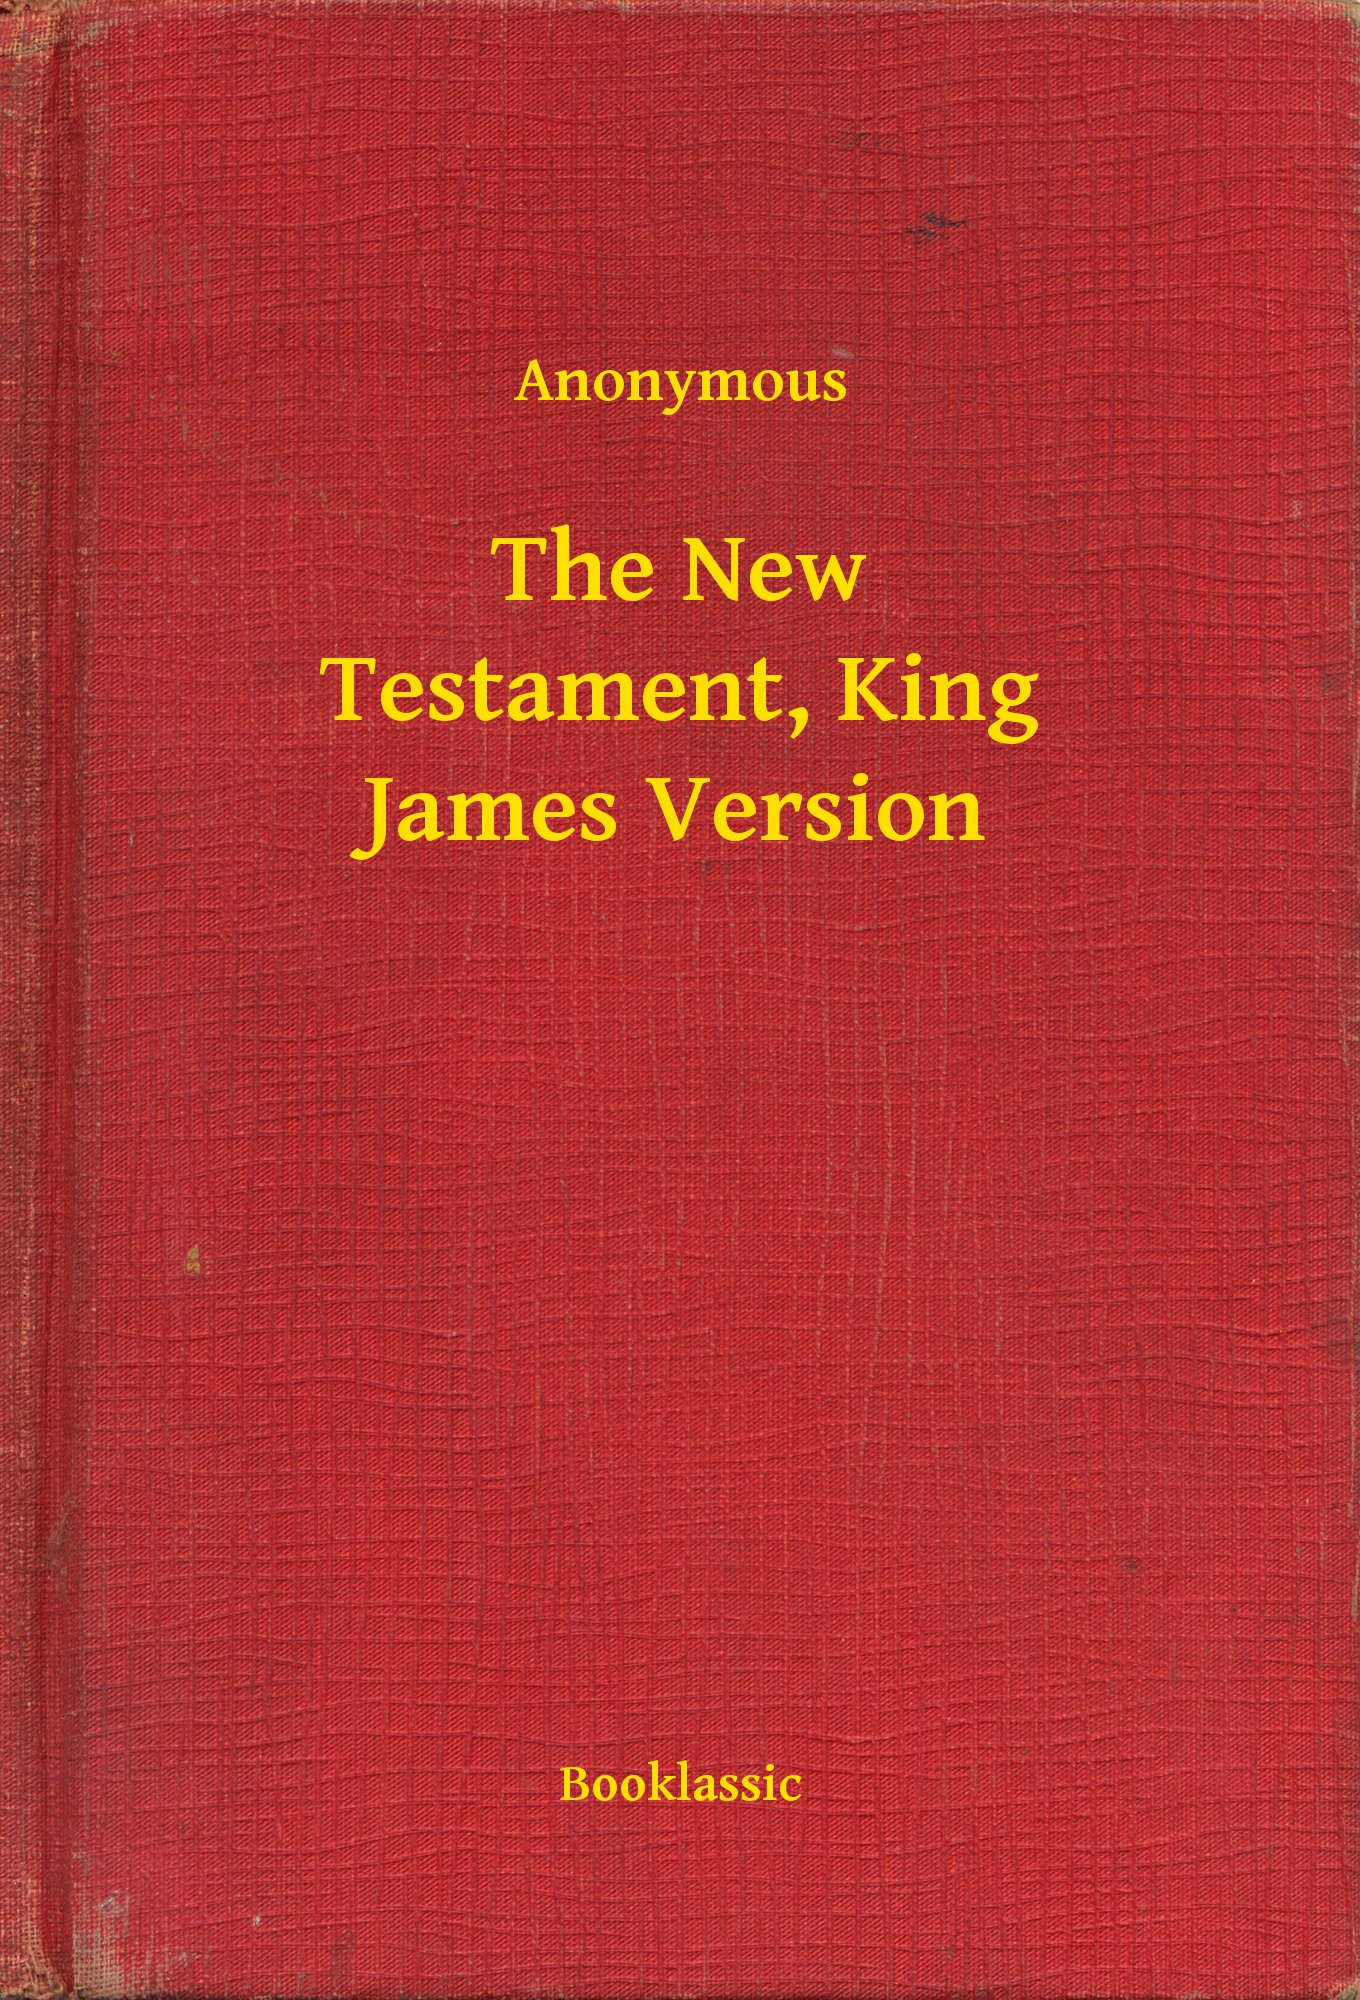 The New Testament, King James Version